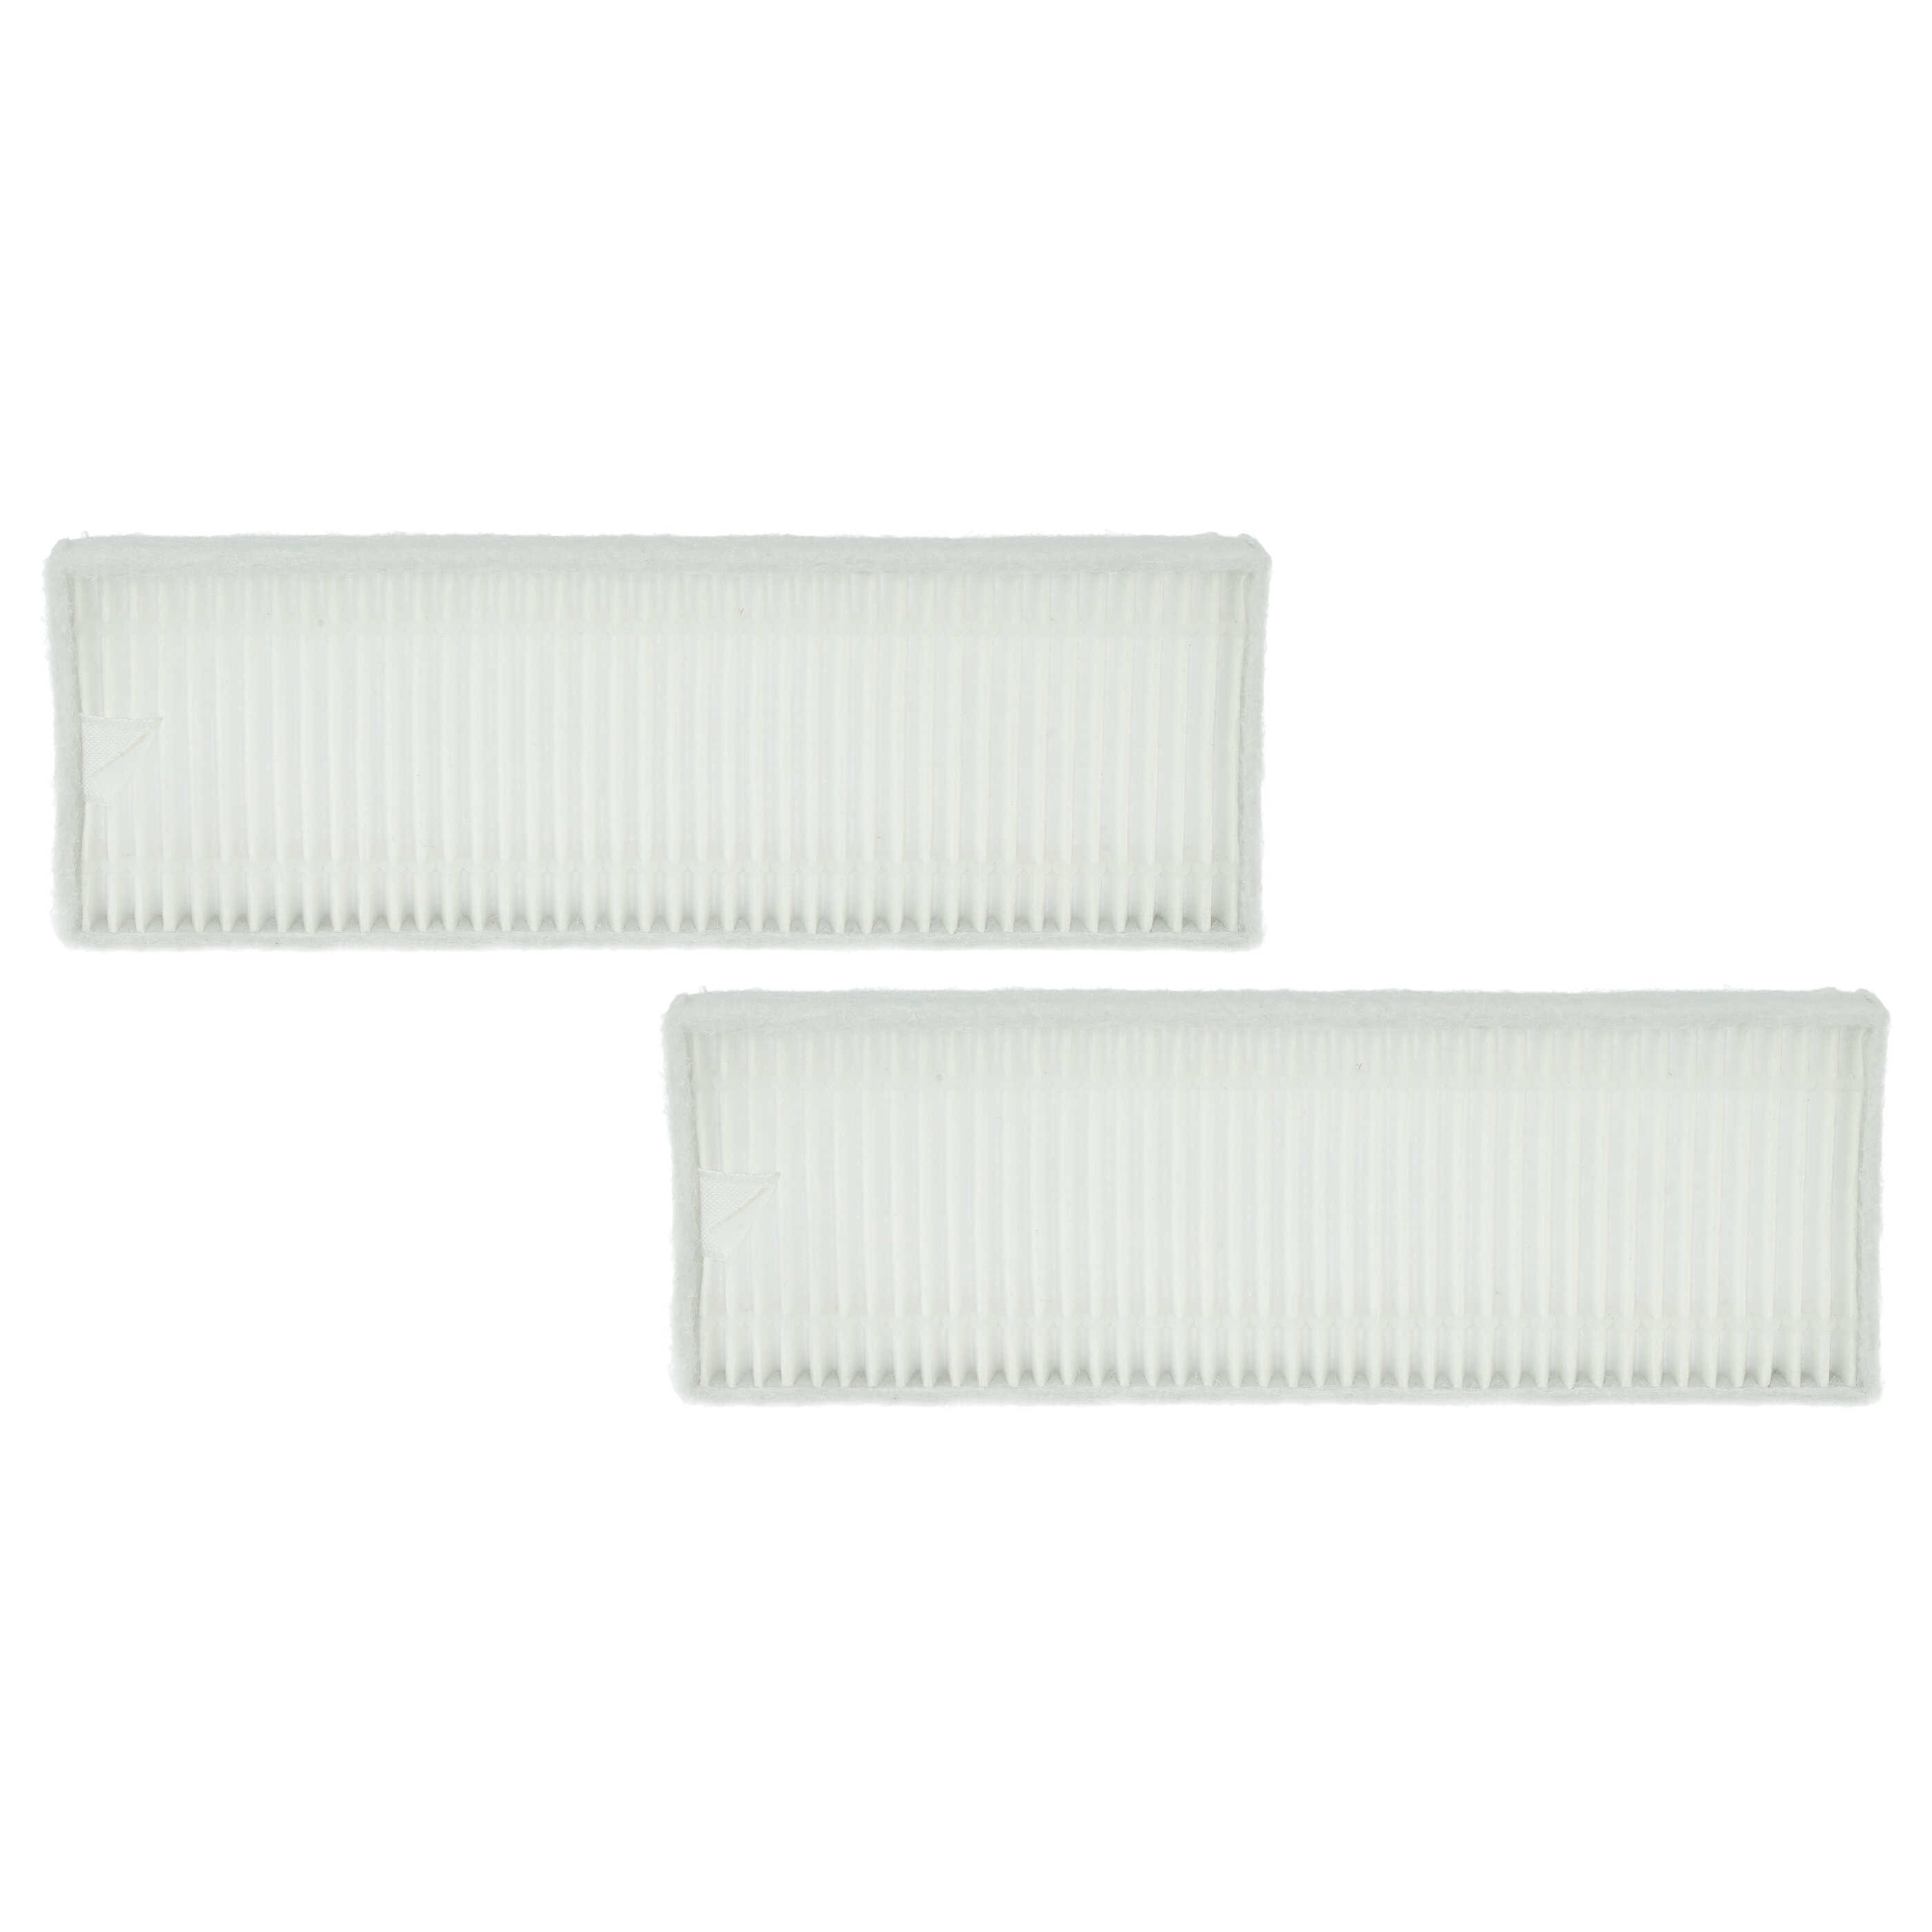 2x Filter Element suitable for 3490/4090, M7, STYJ02YM, V-RVCLM21B Cecotec, Proscenic, Xiaomi 3490/4090 Robot 